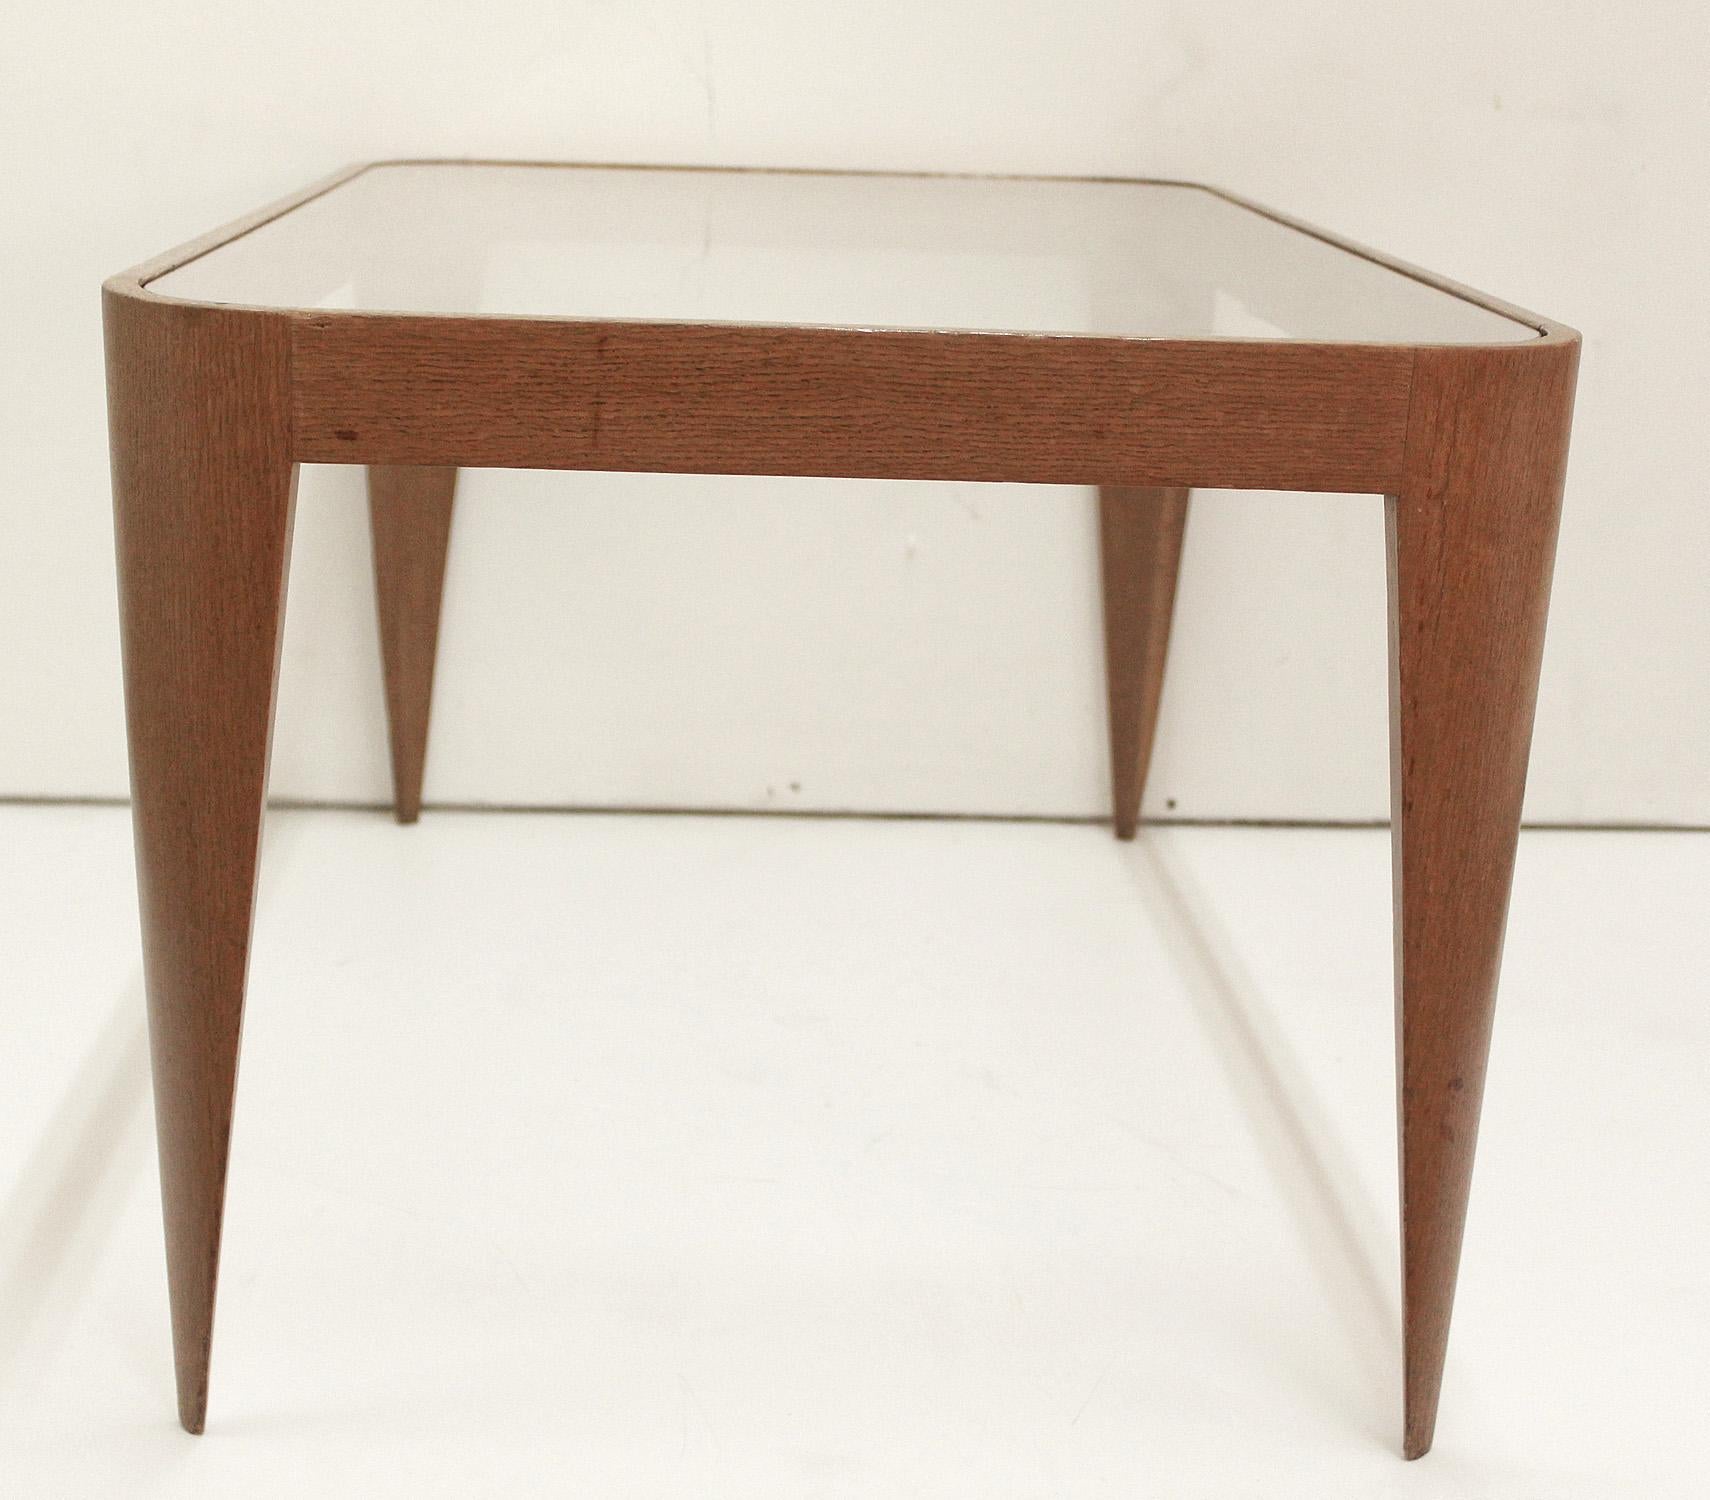 Mid-Century Modern Oak and Glass Coffee Table by Gio Ponti, Italy 1940